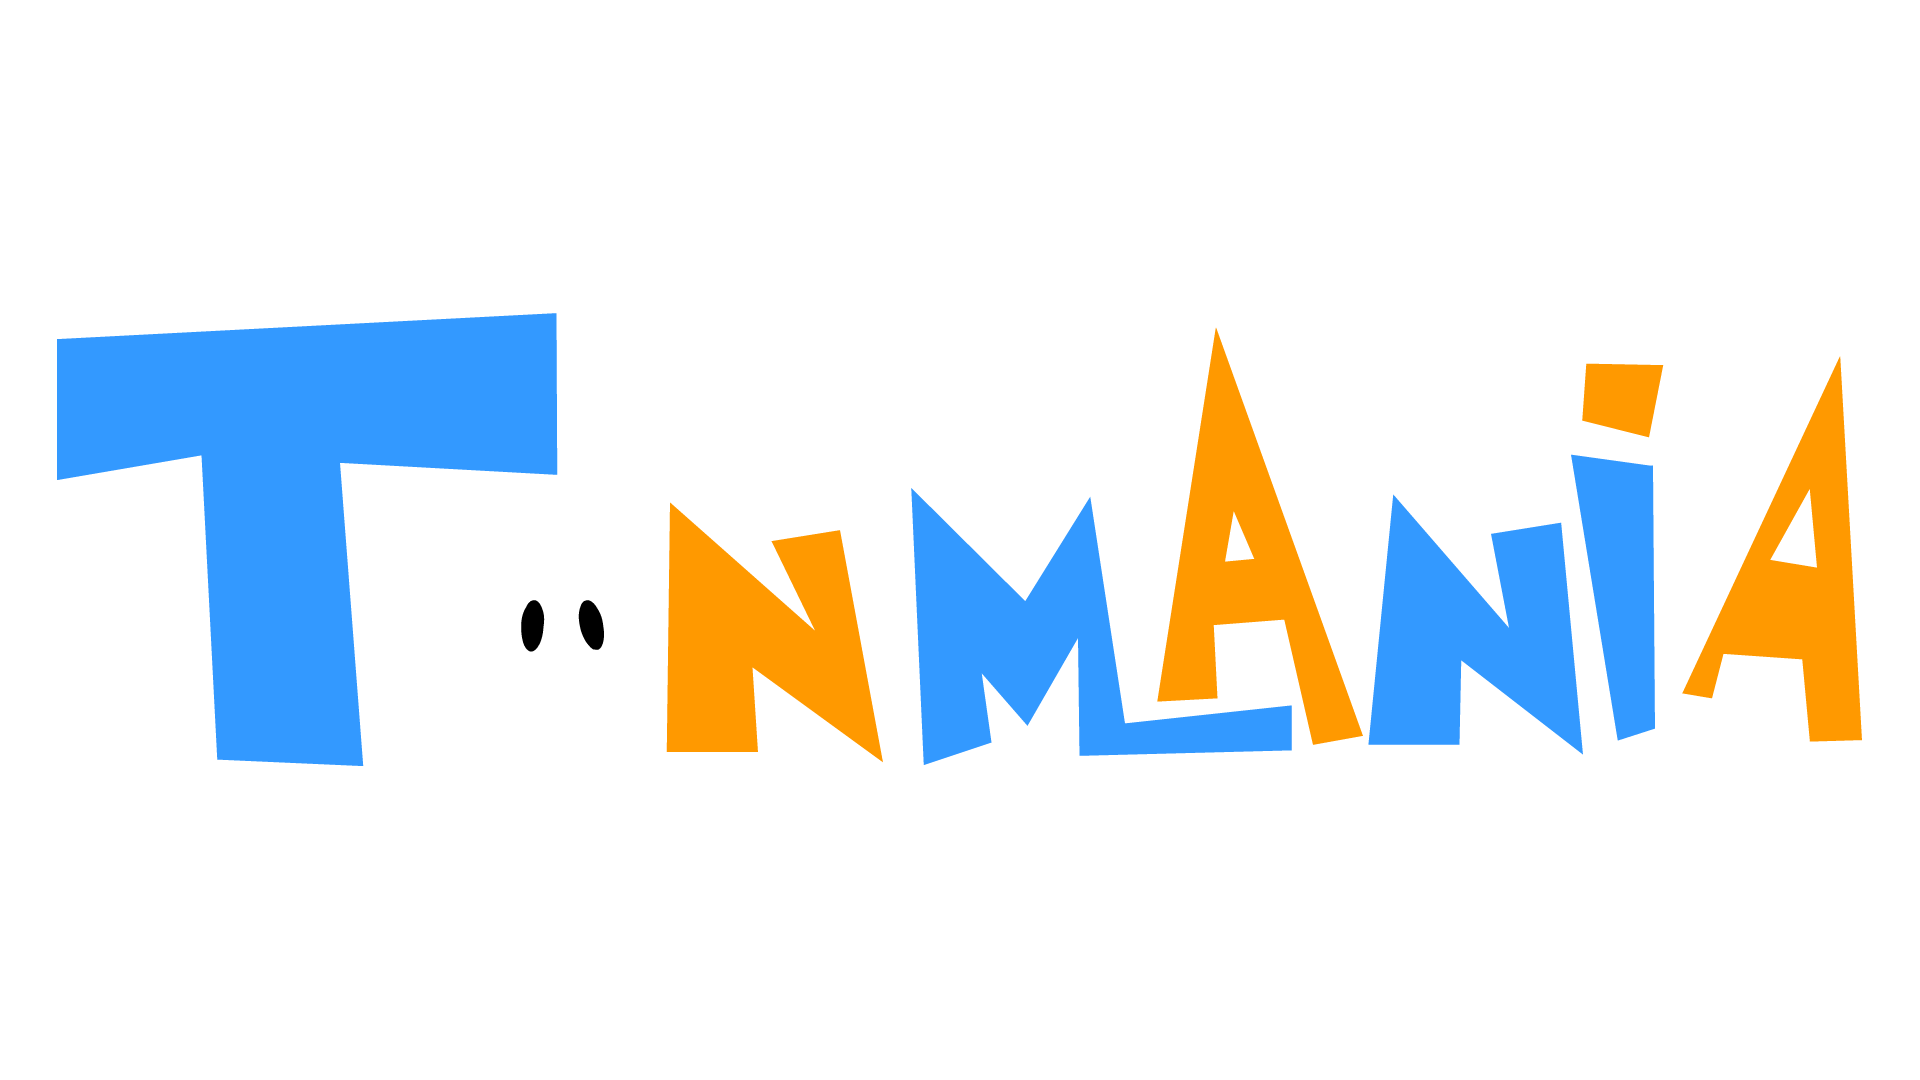 Toonmania Download